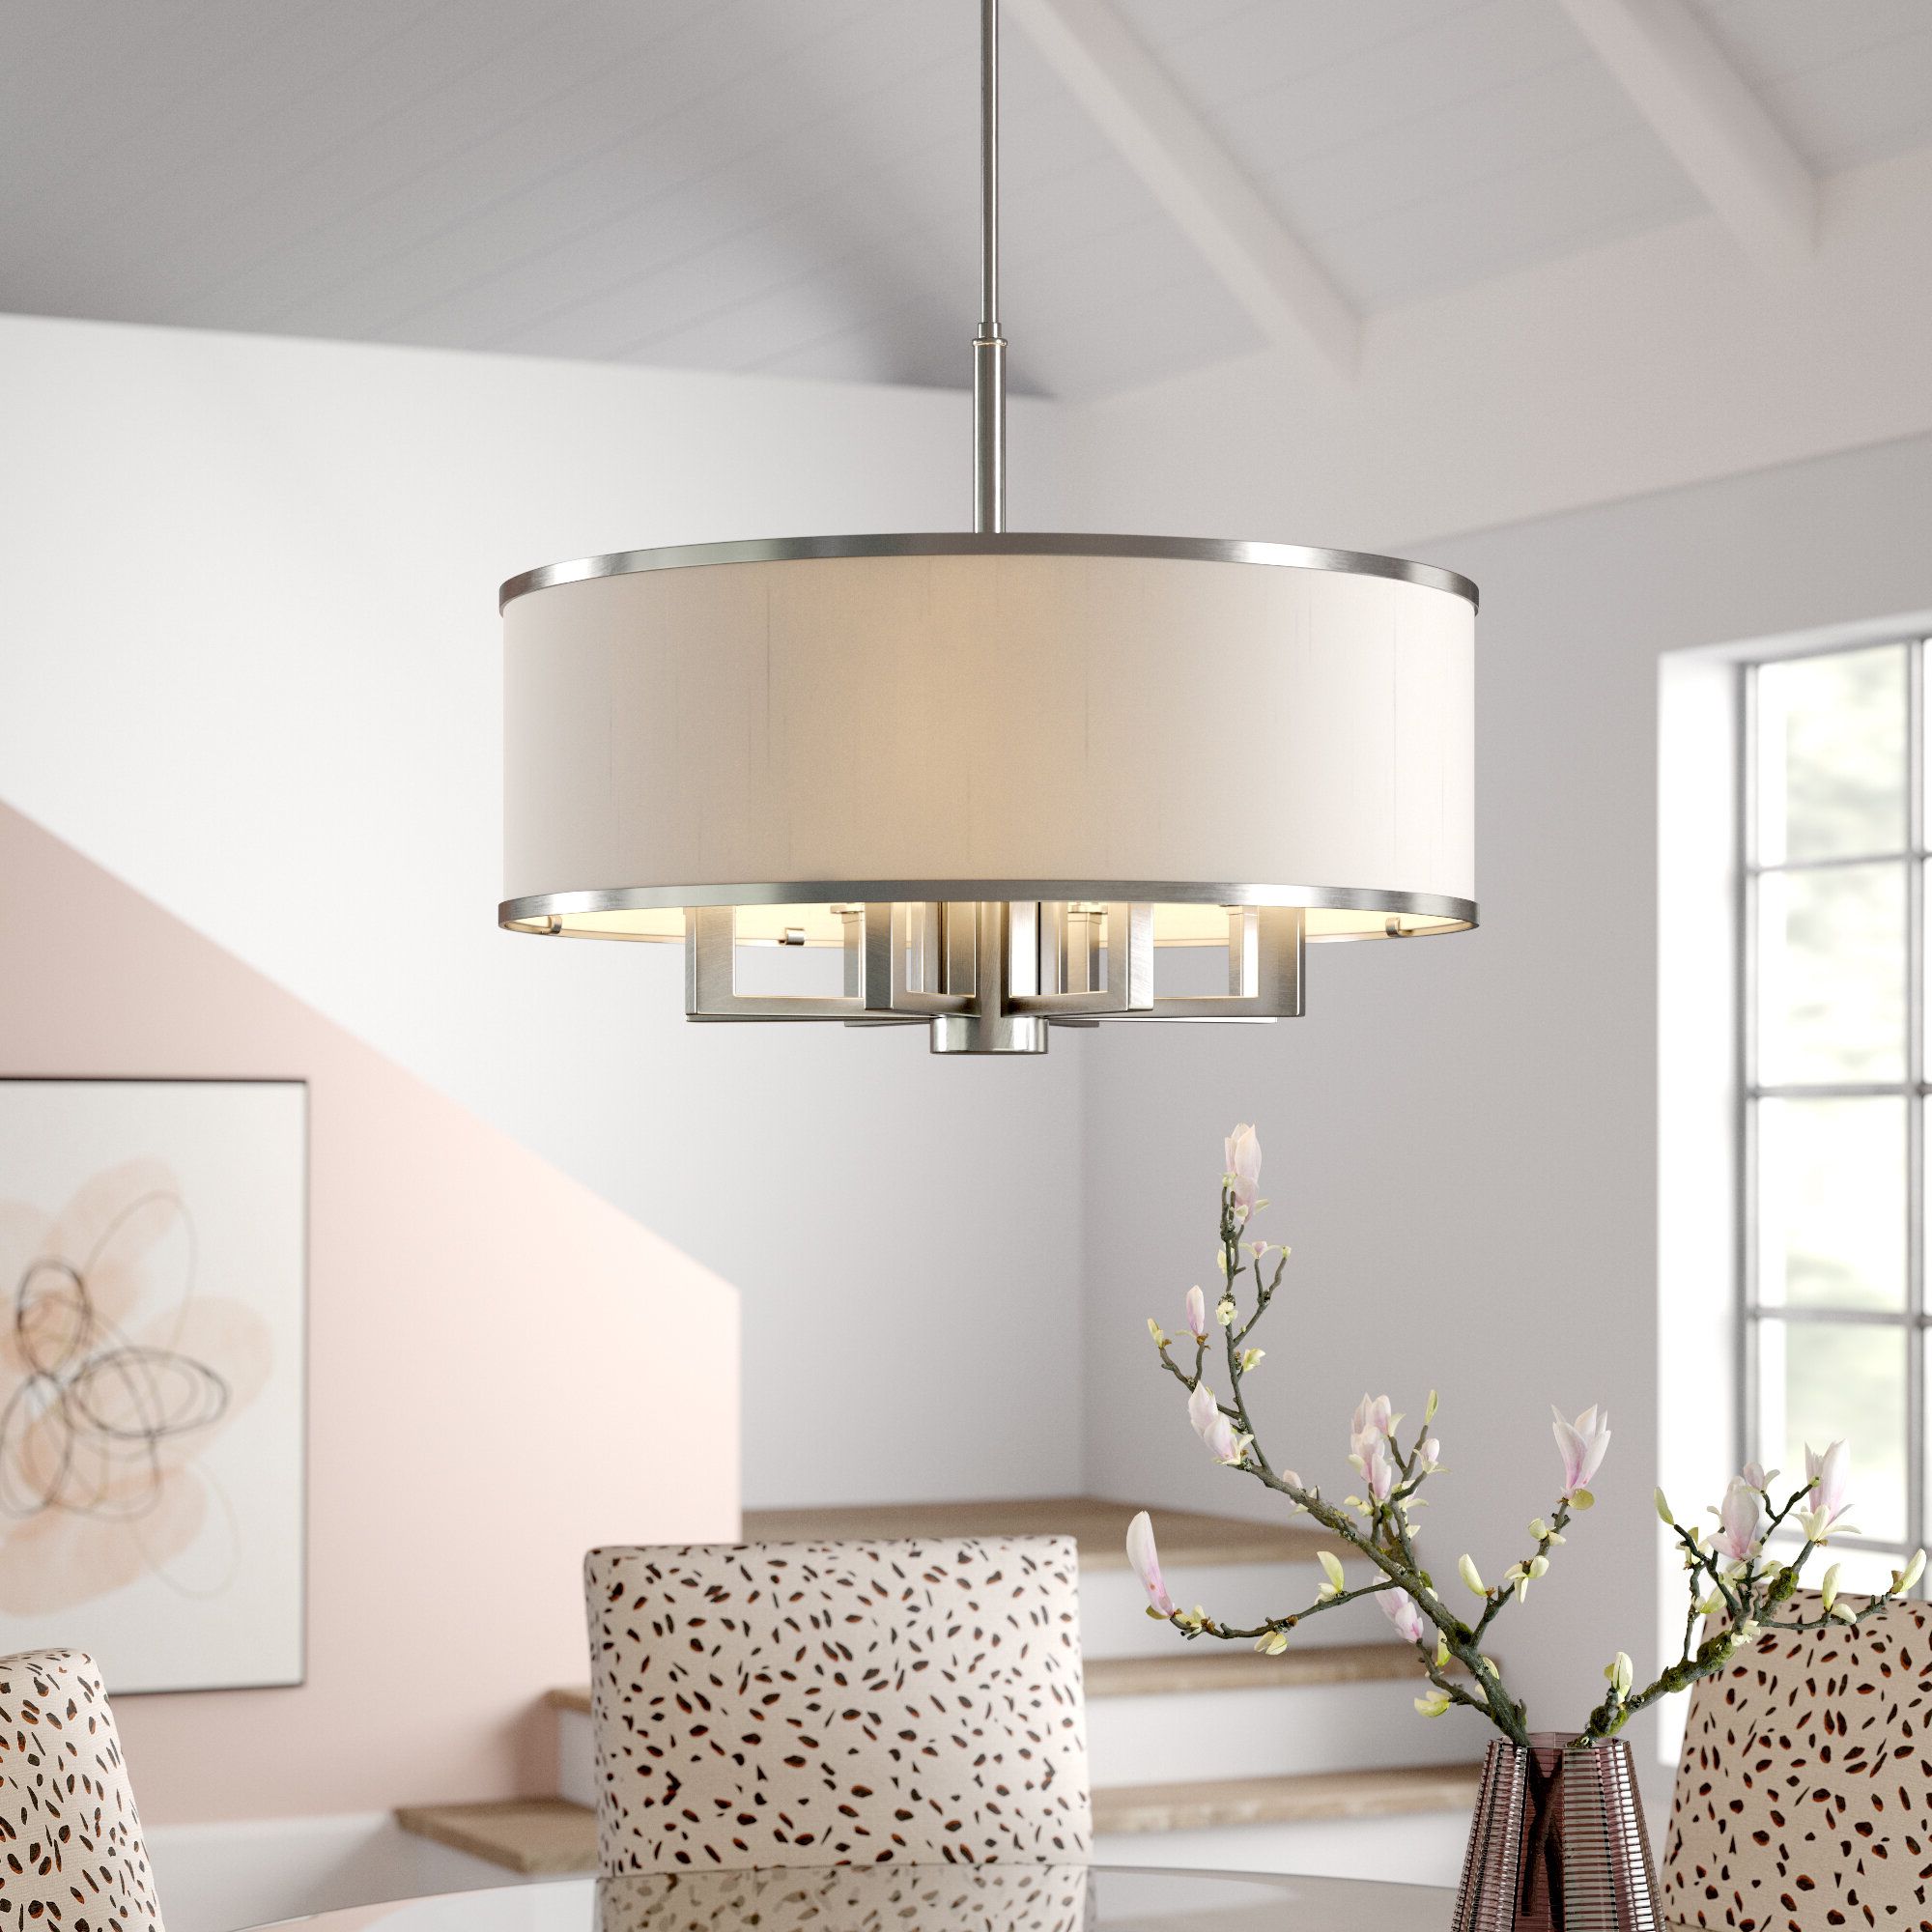 Fashionable Wightman Drum Chandeliers Intended For Breithaup 7 Light Drum Chandelier (View 13 of 25)